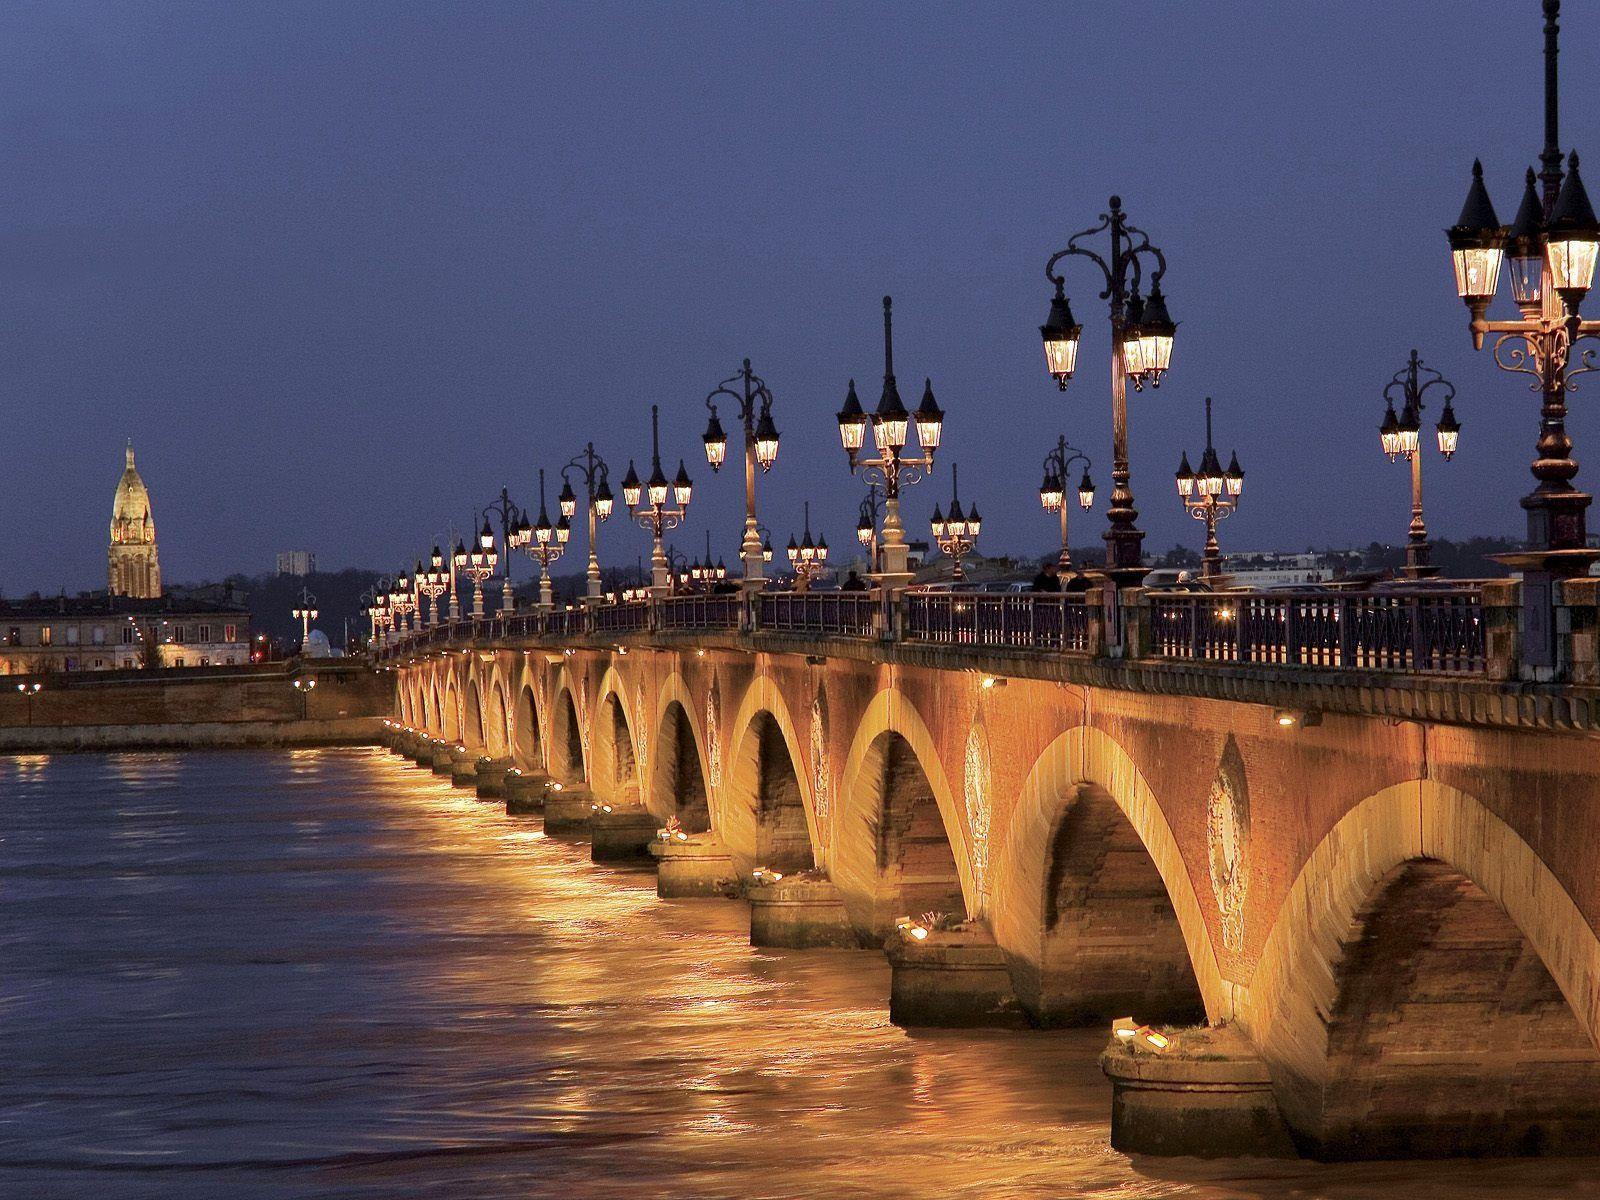 Night bridge in Bordeaux, France wallpaper and image